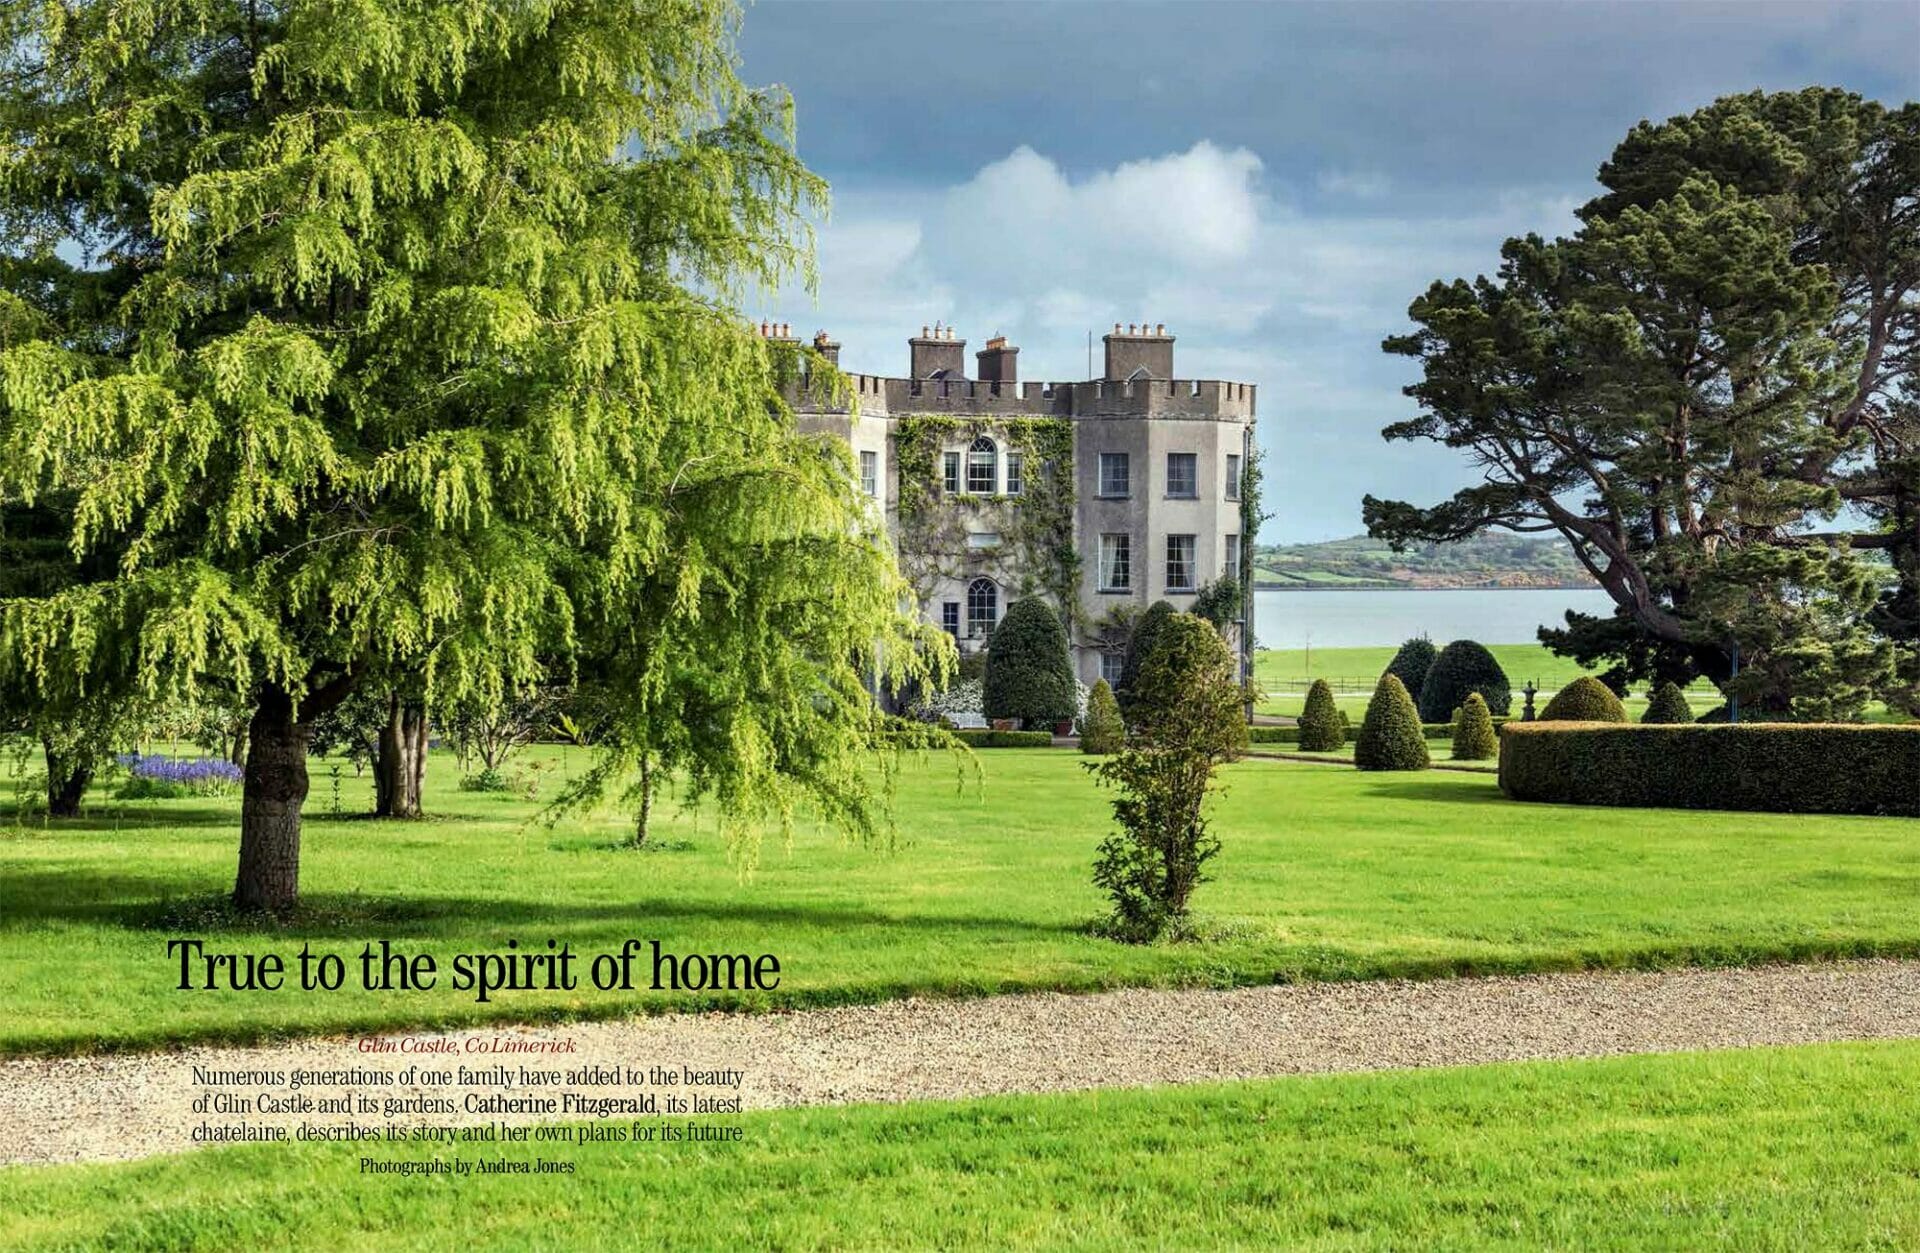 COUNTRY LIFE, MAY 2018 Featuring Glin Castle Gardens